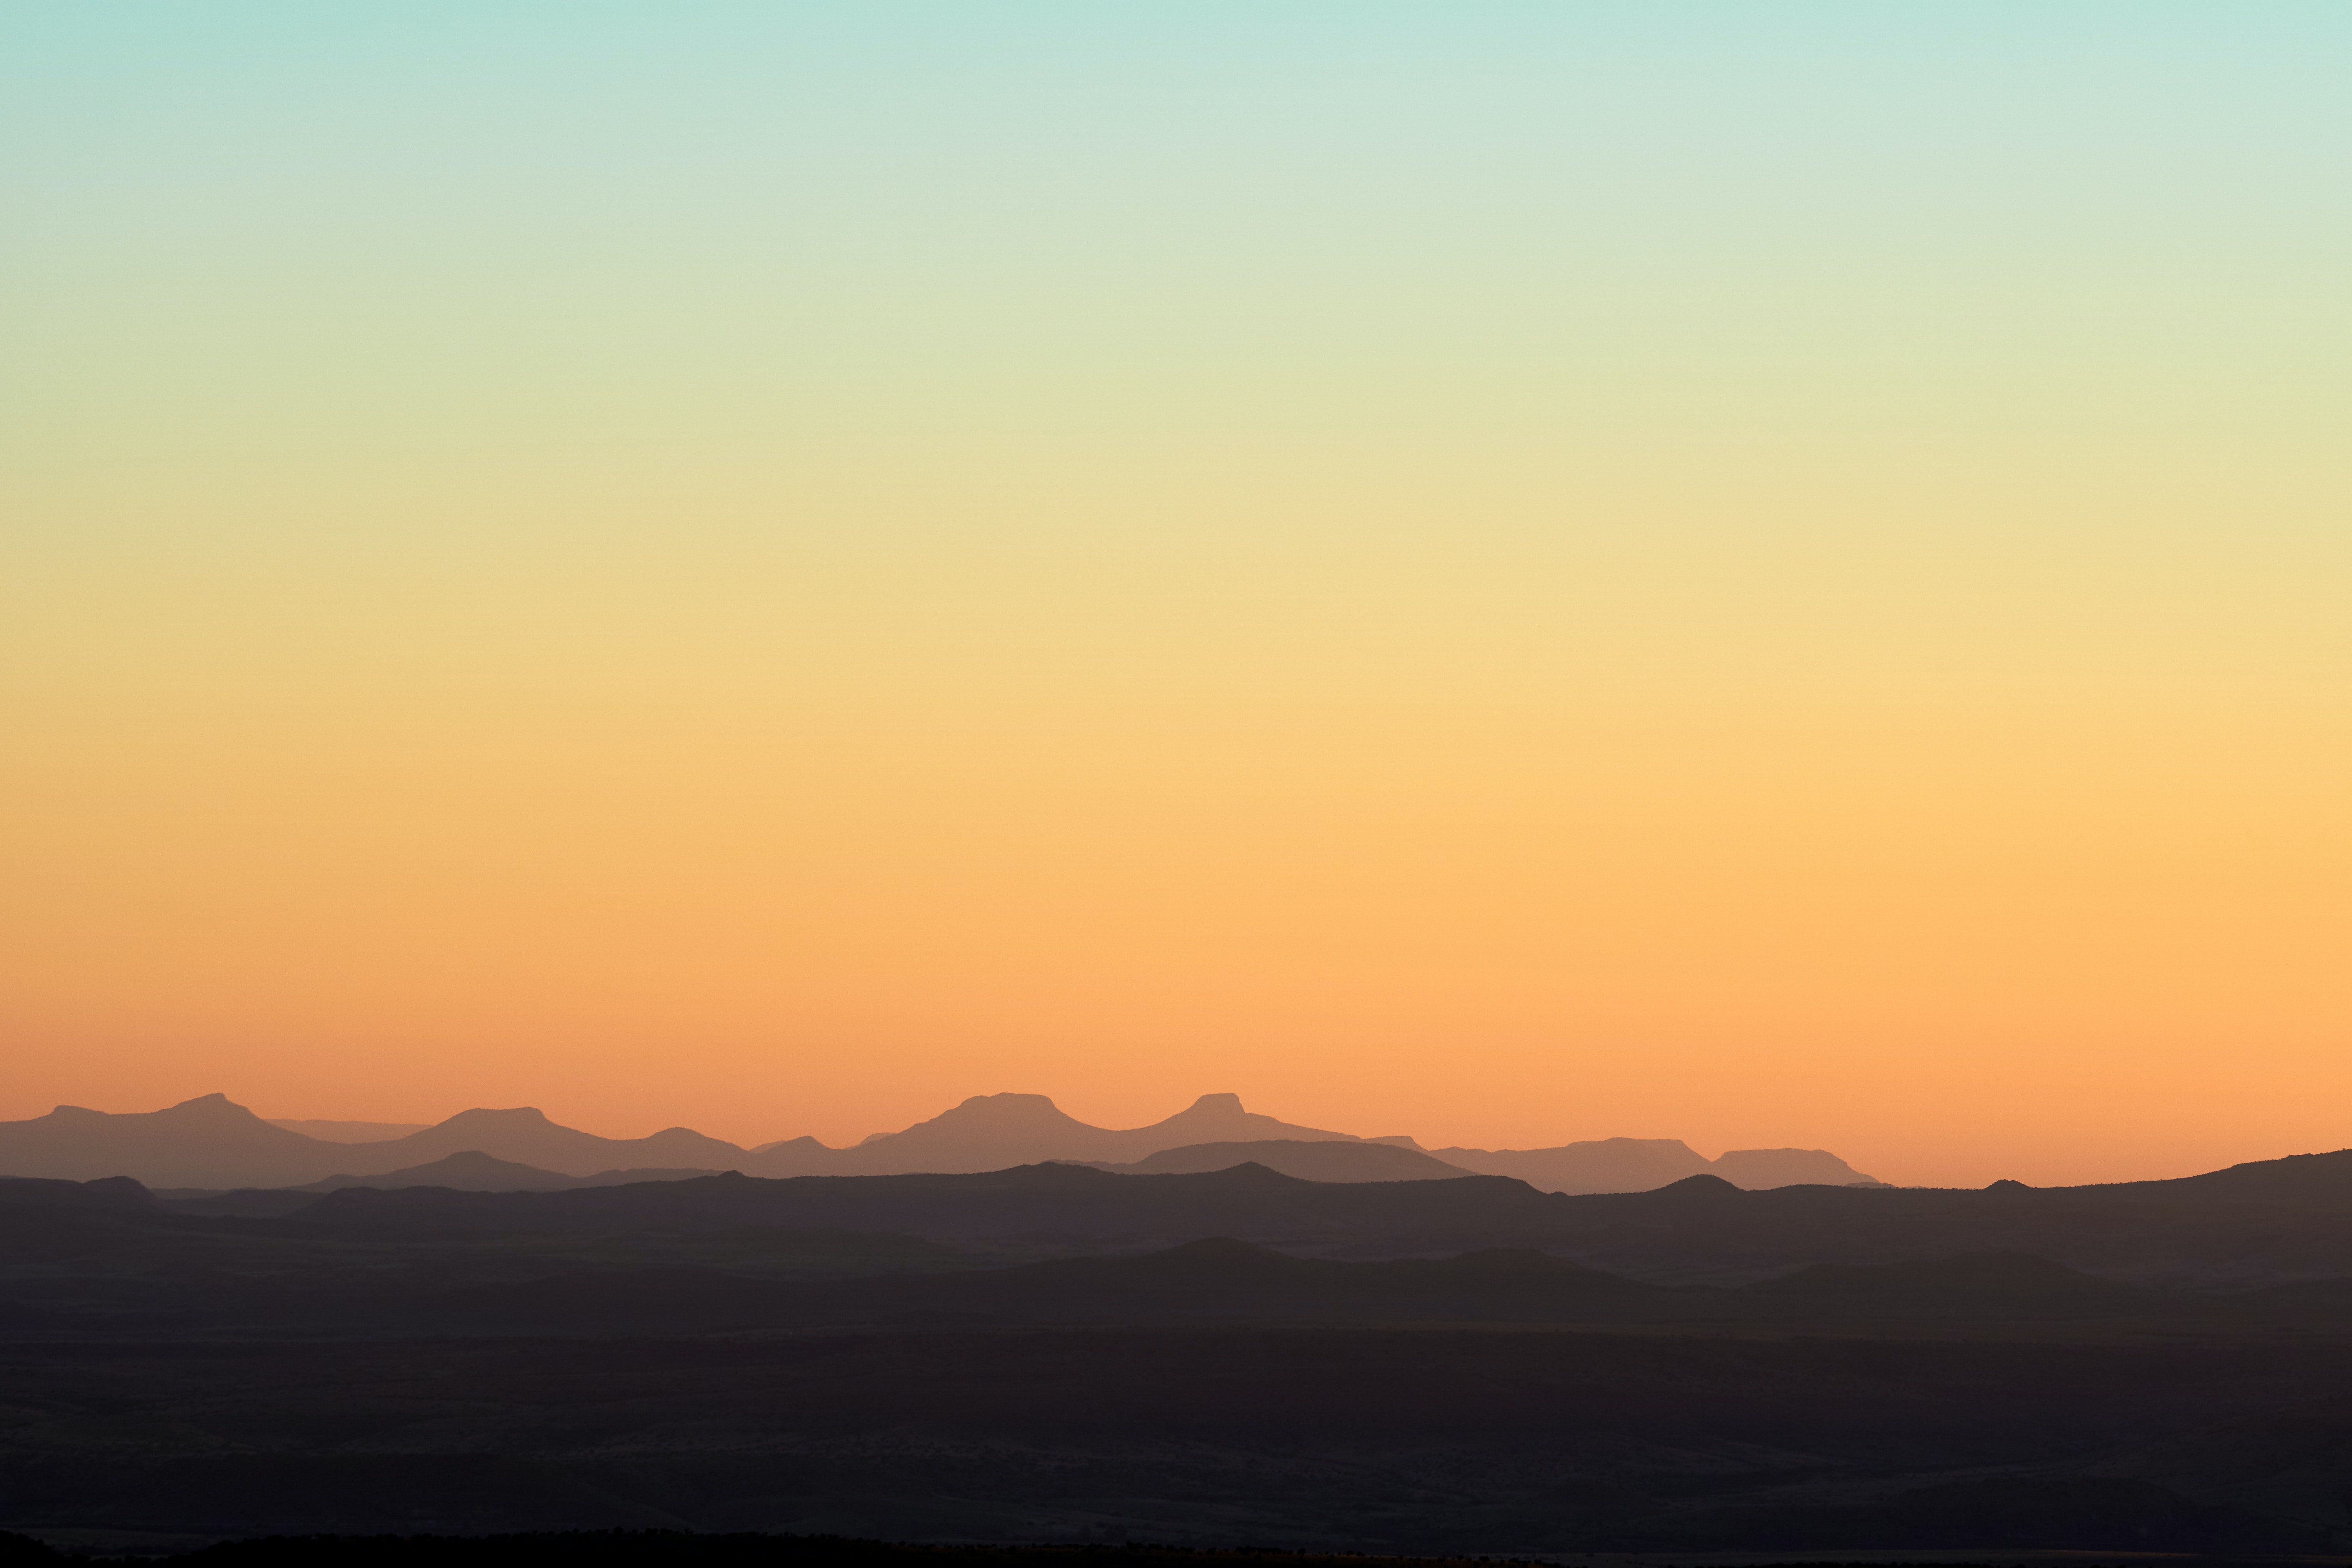 android hills, nature, sunset, sky, mountains, dahl, distance